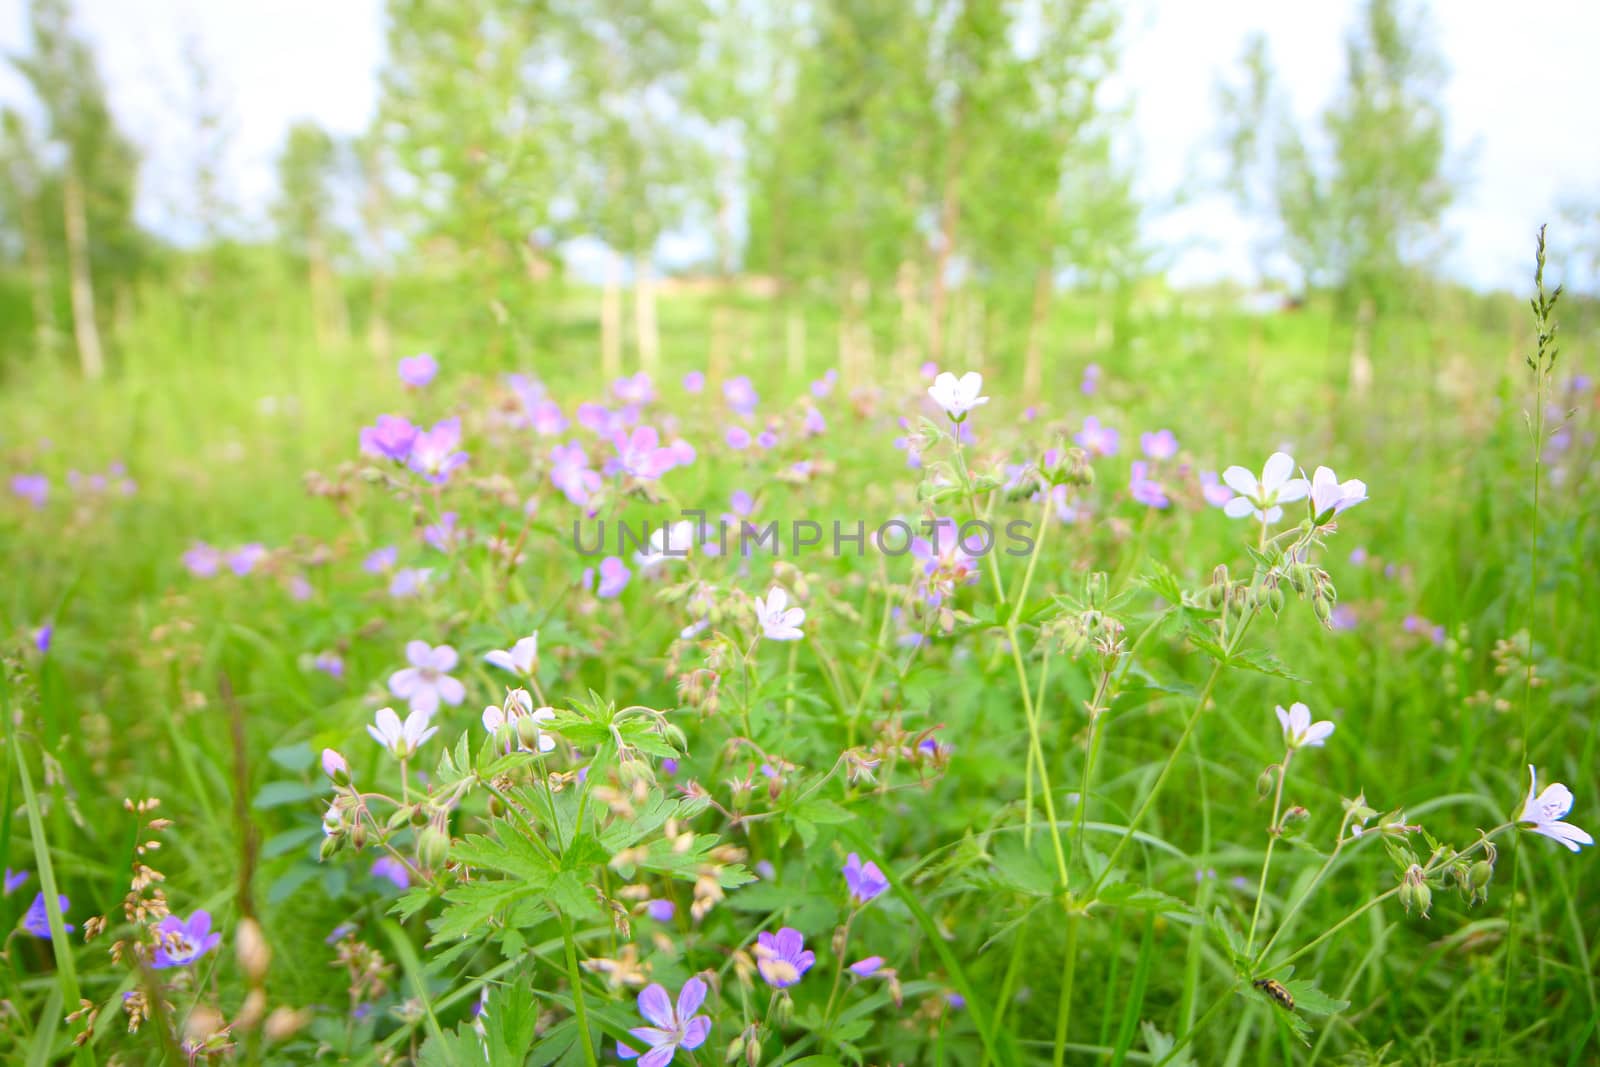 Wild flowers in grass, natural background